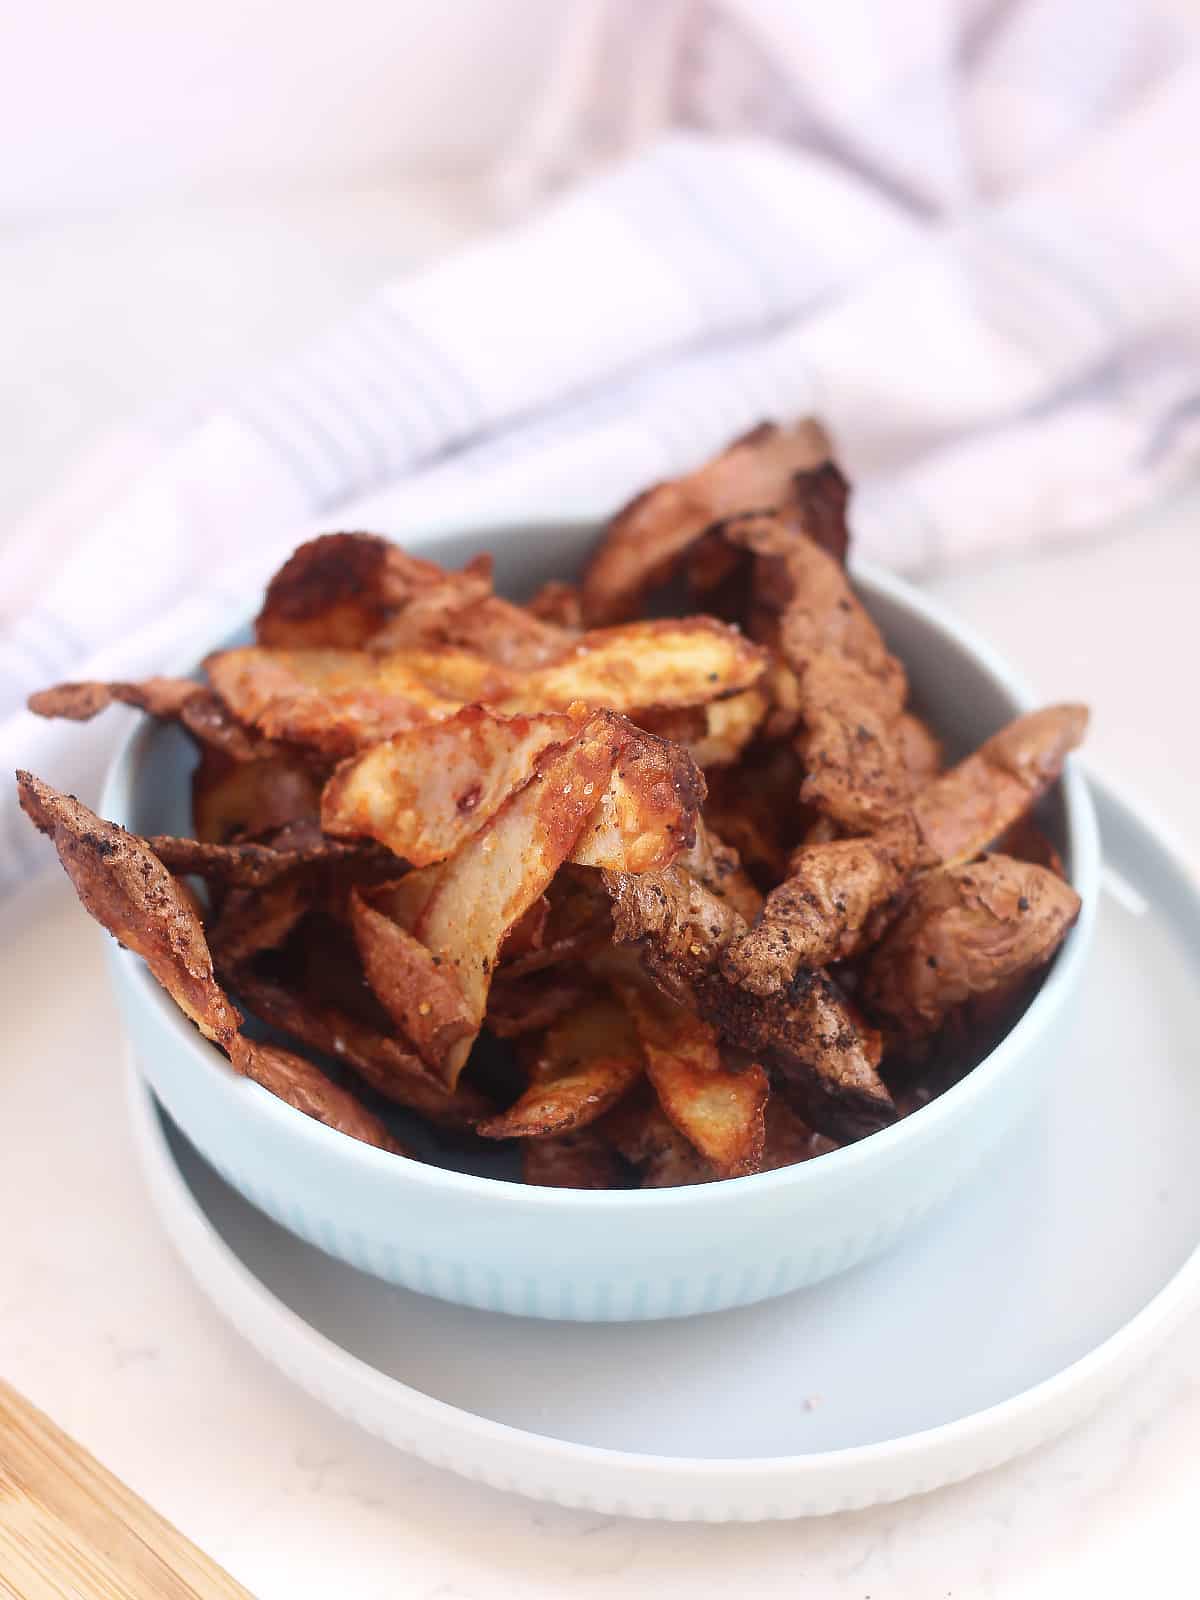 Golden brown potato chips made from peelings.